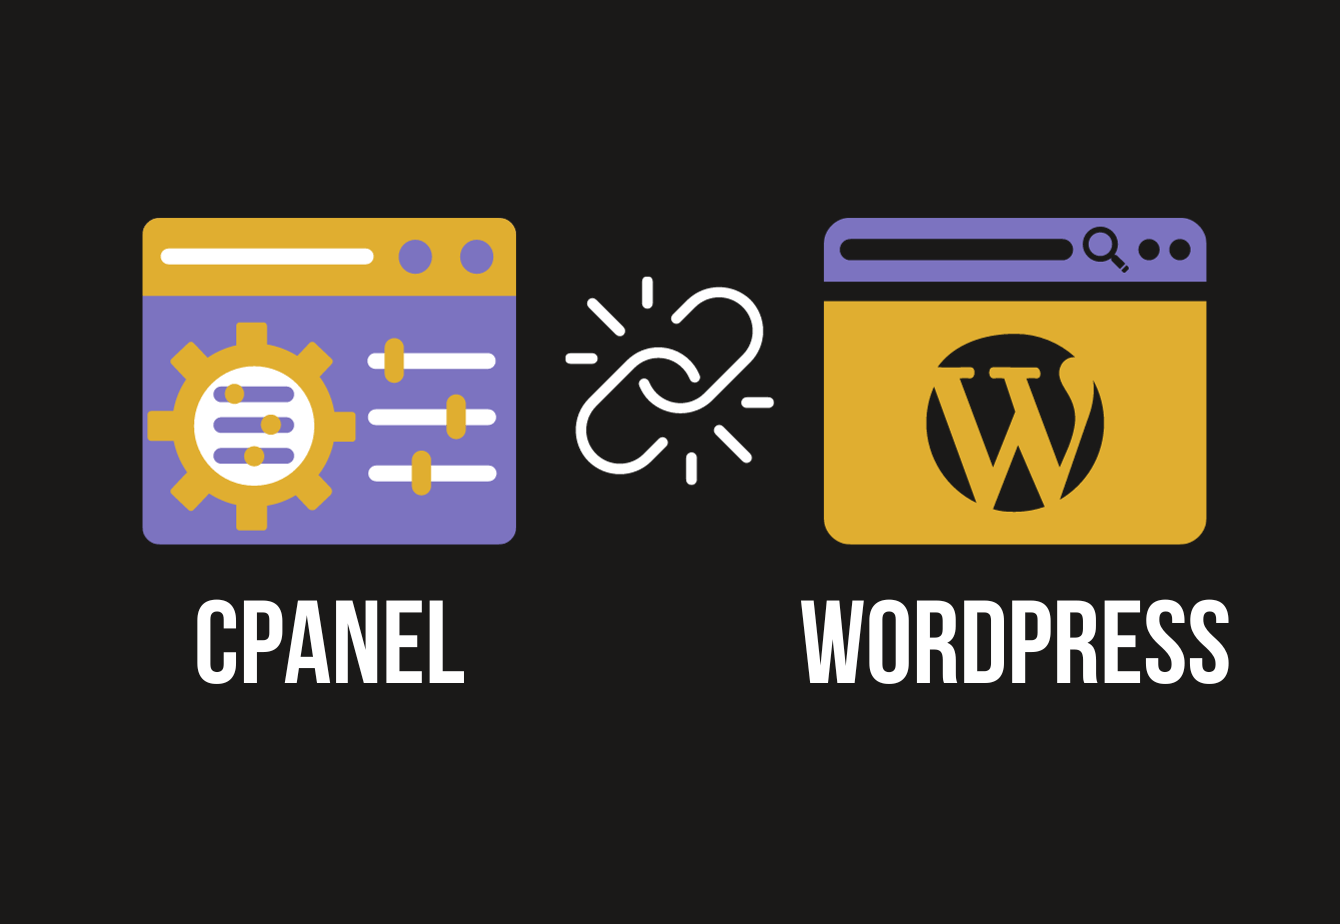 How to Install WordPress on Cpanel